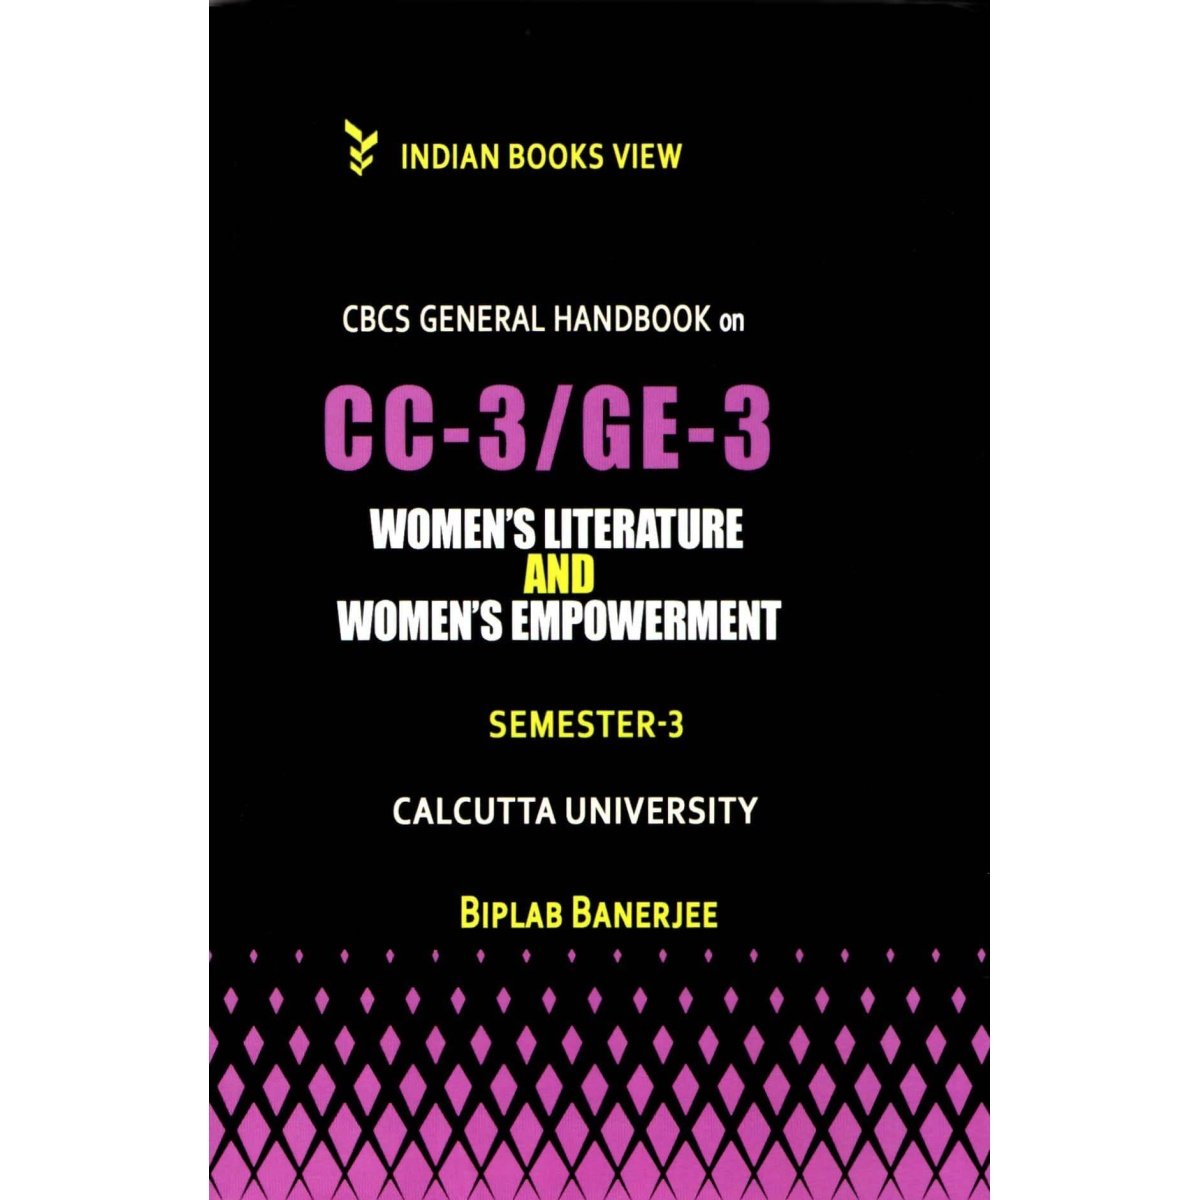 CC-3 GE-3 CBCS General Hand Book on Women's Literature and Women's Empowerment